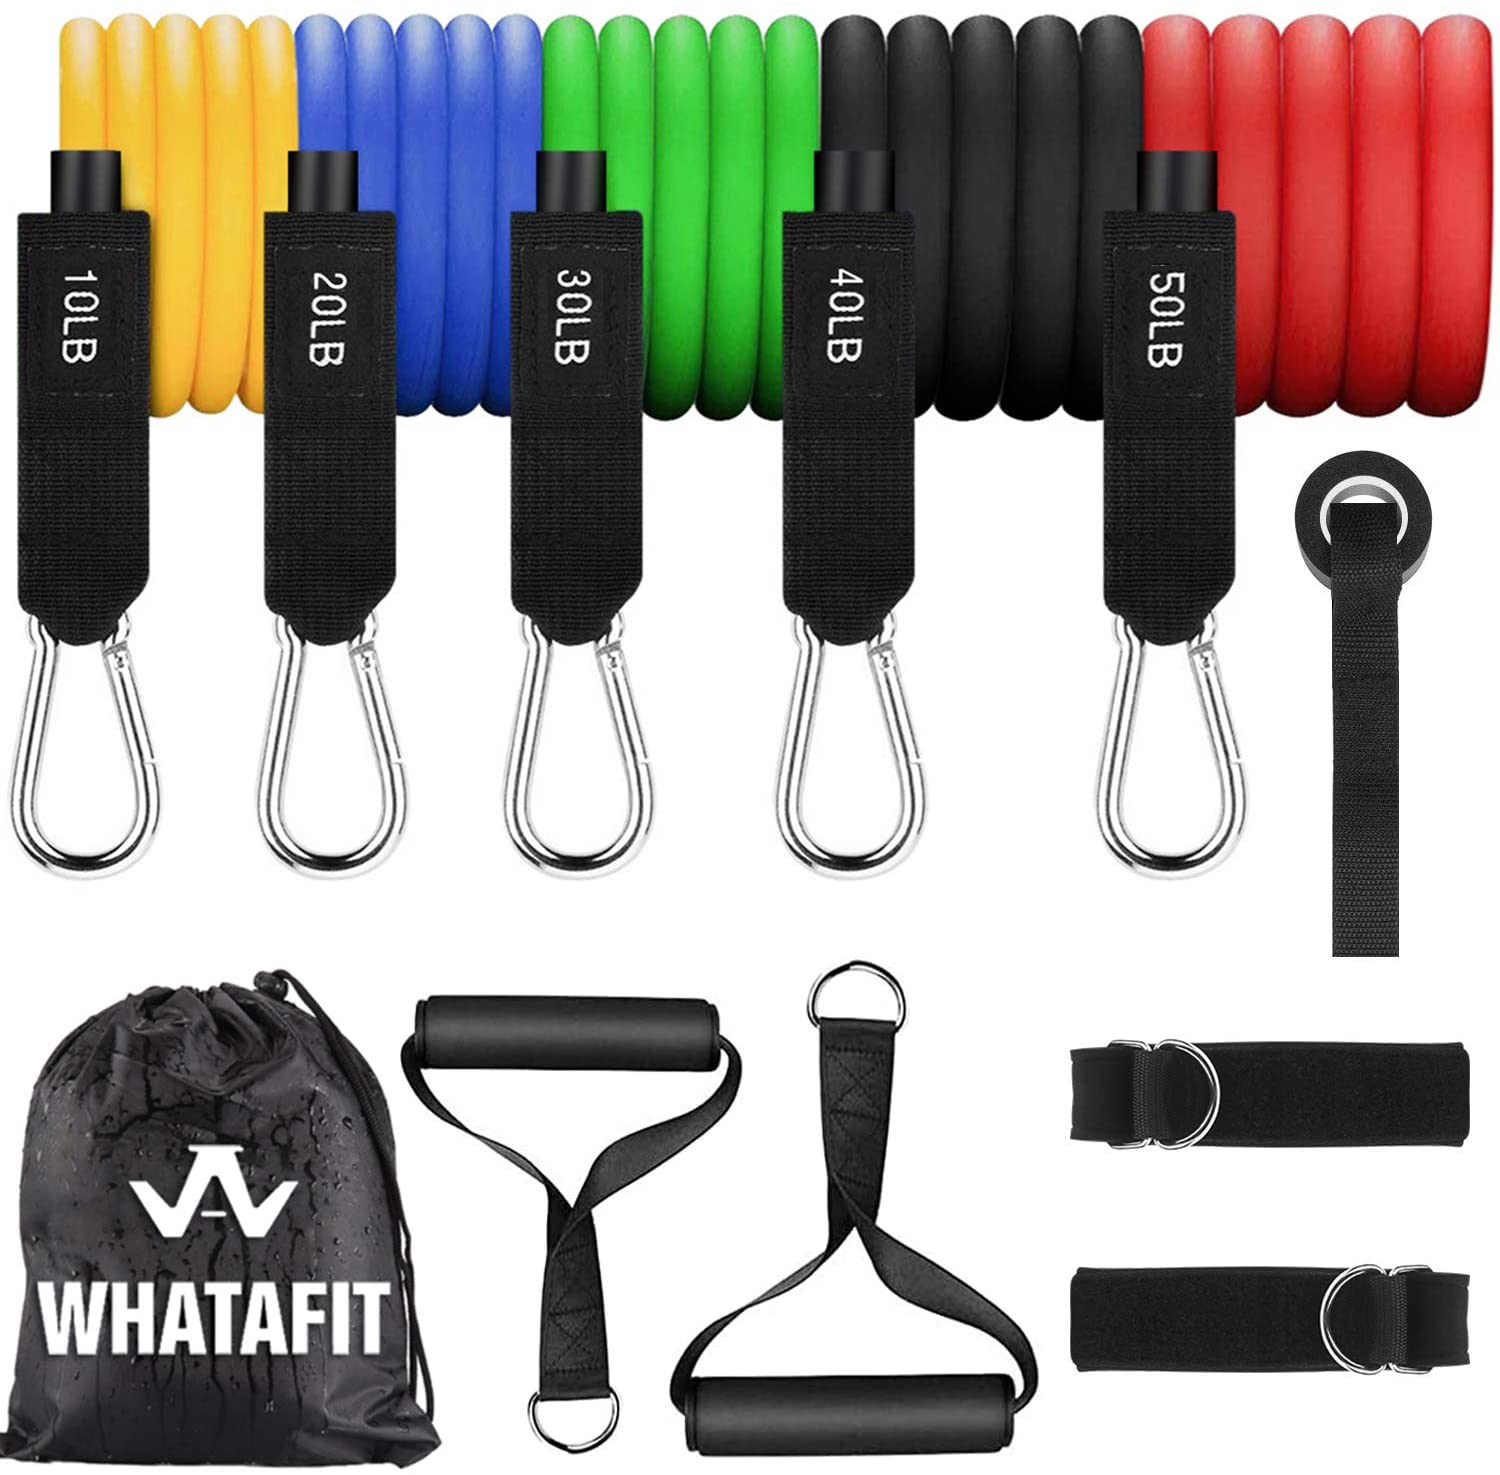 WHATAFIT Resistance Bands Set (11pcs),Exercise Bands with Door Anchor,Handles,Waterproof Carry Bag,Legs Ankle Straps for Resistance Training,Physical Therapy,Home Workouts